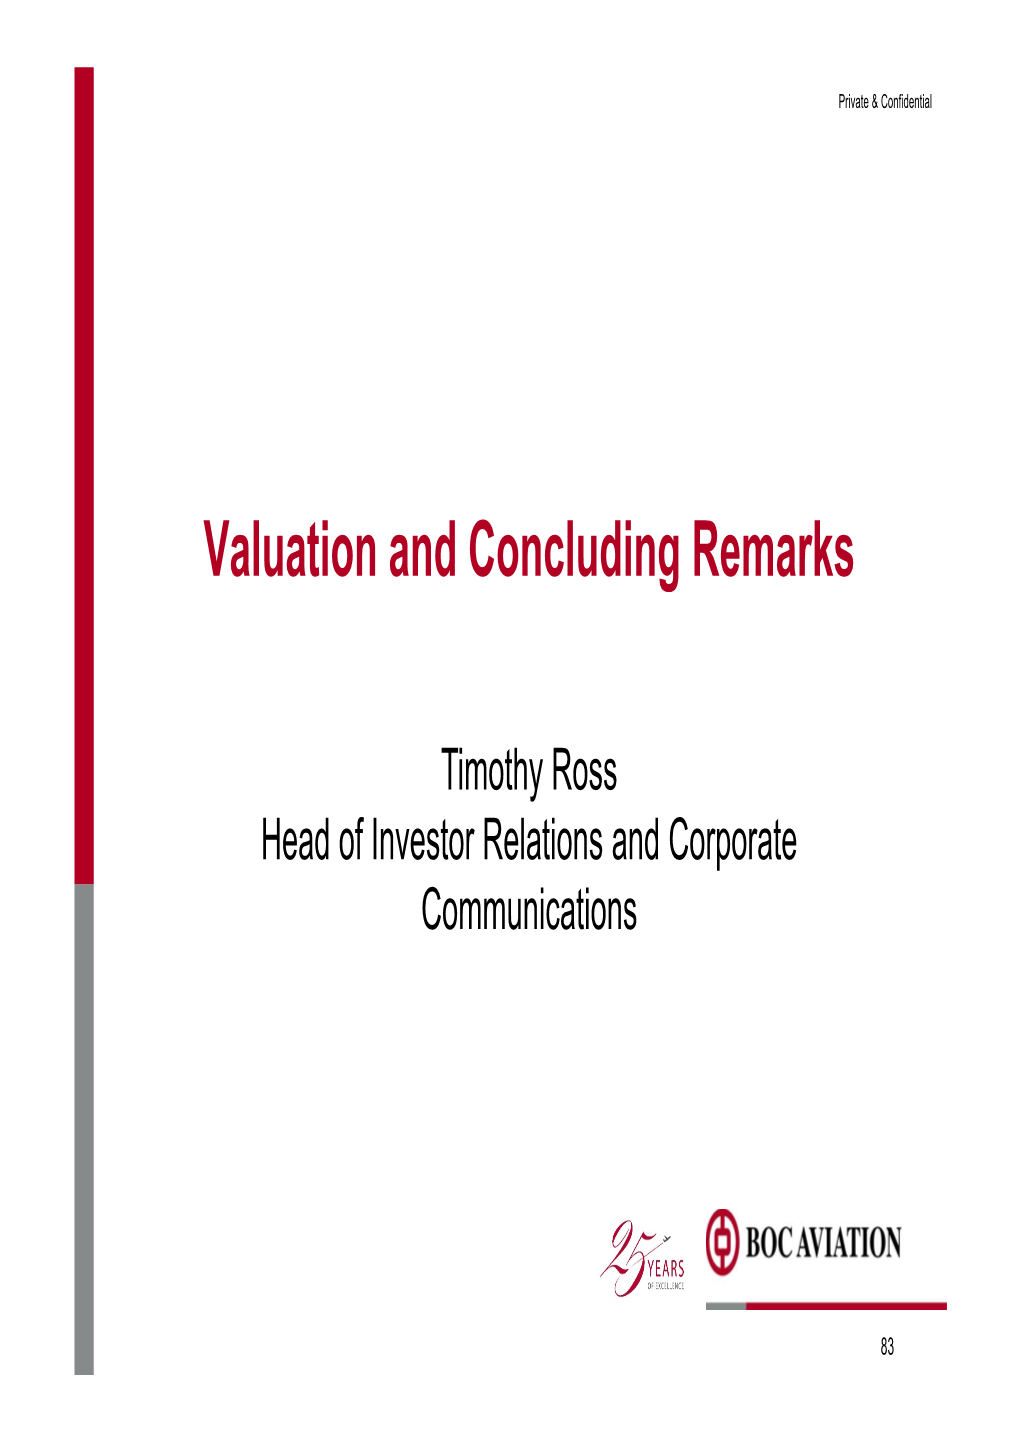 Valuation and Concluding Remarks